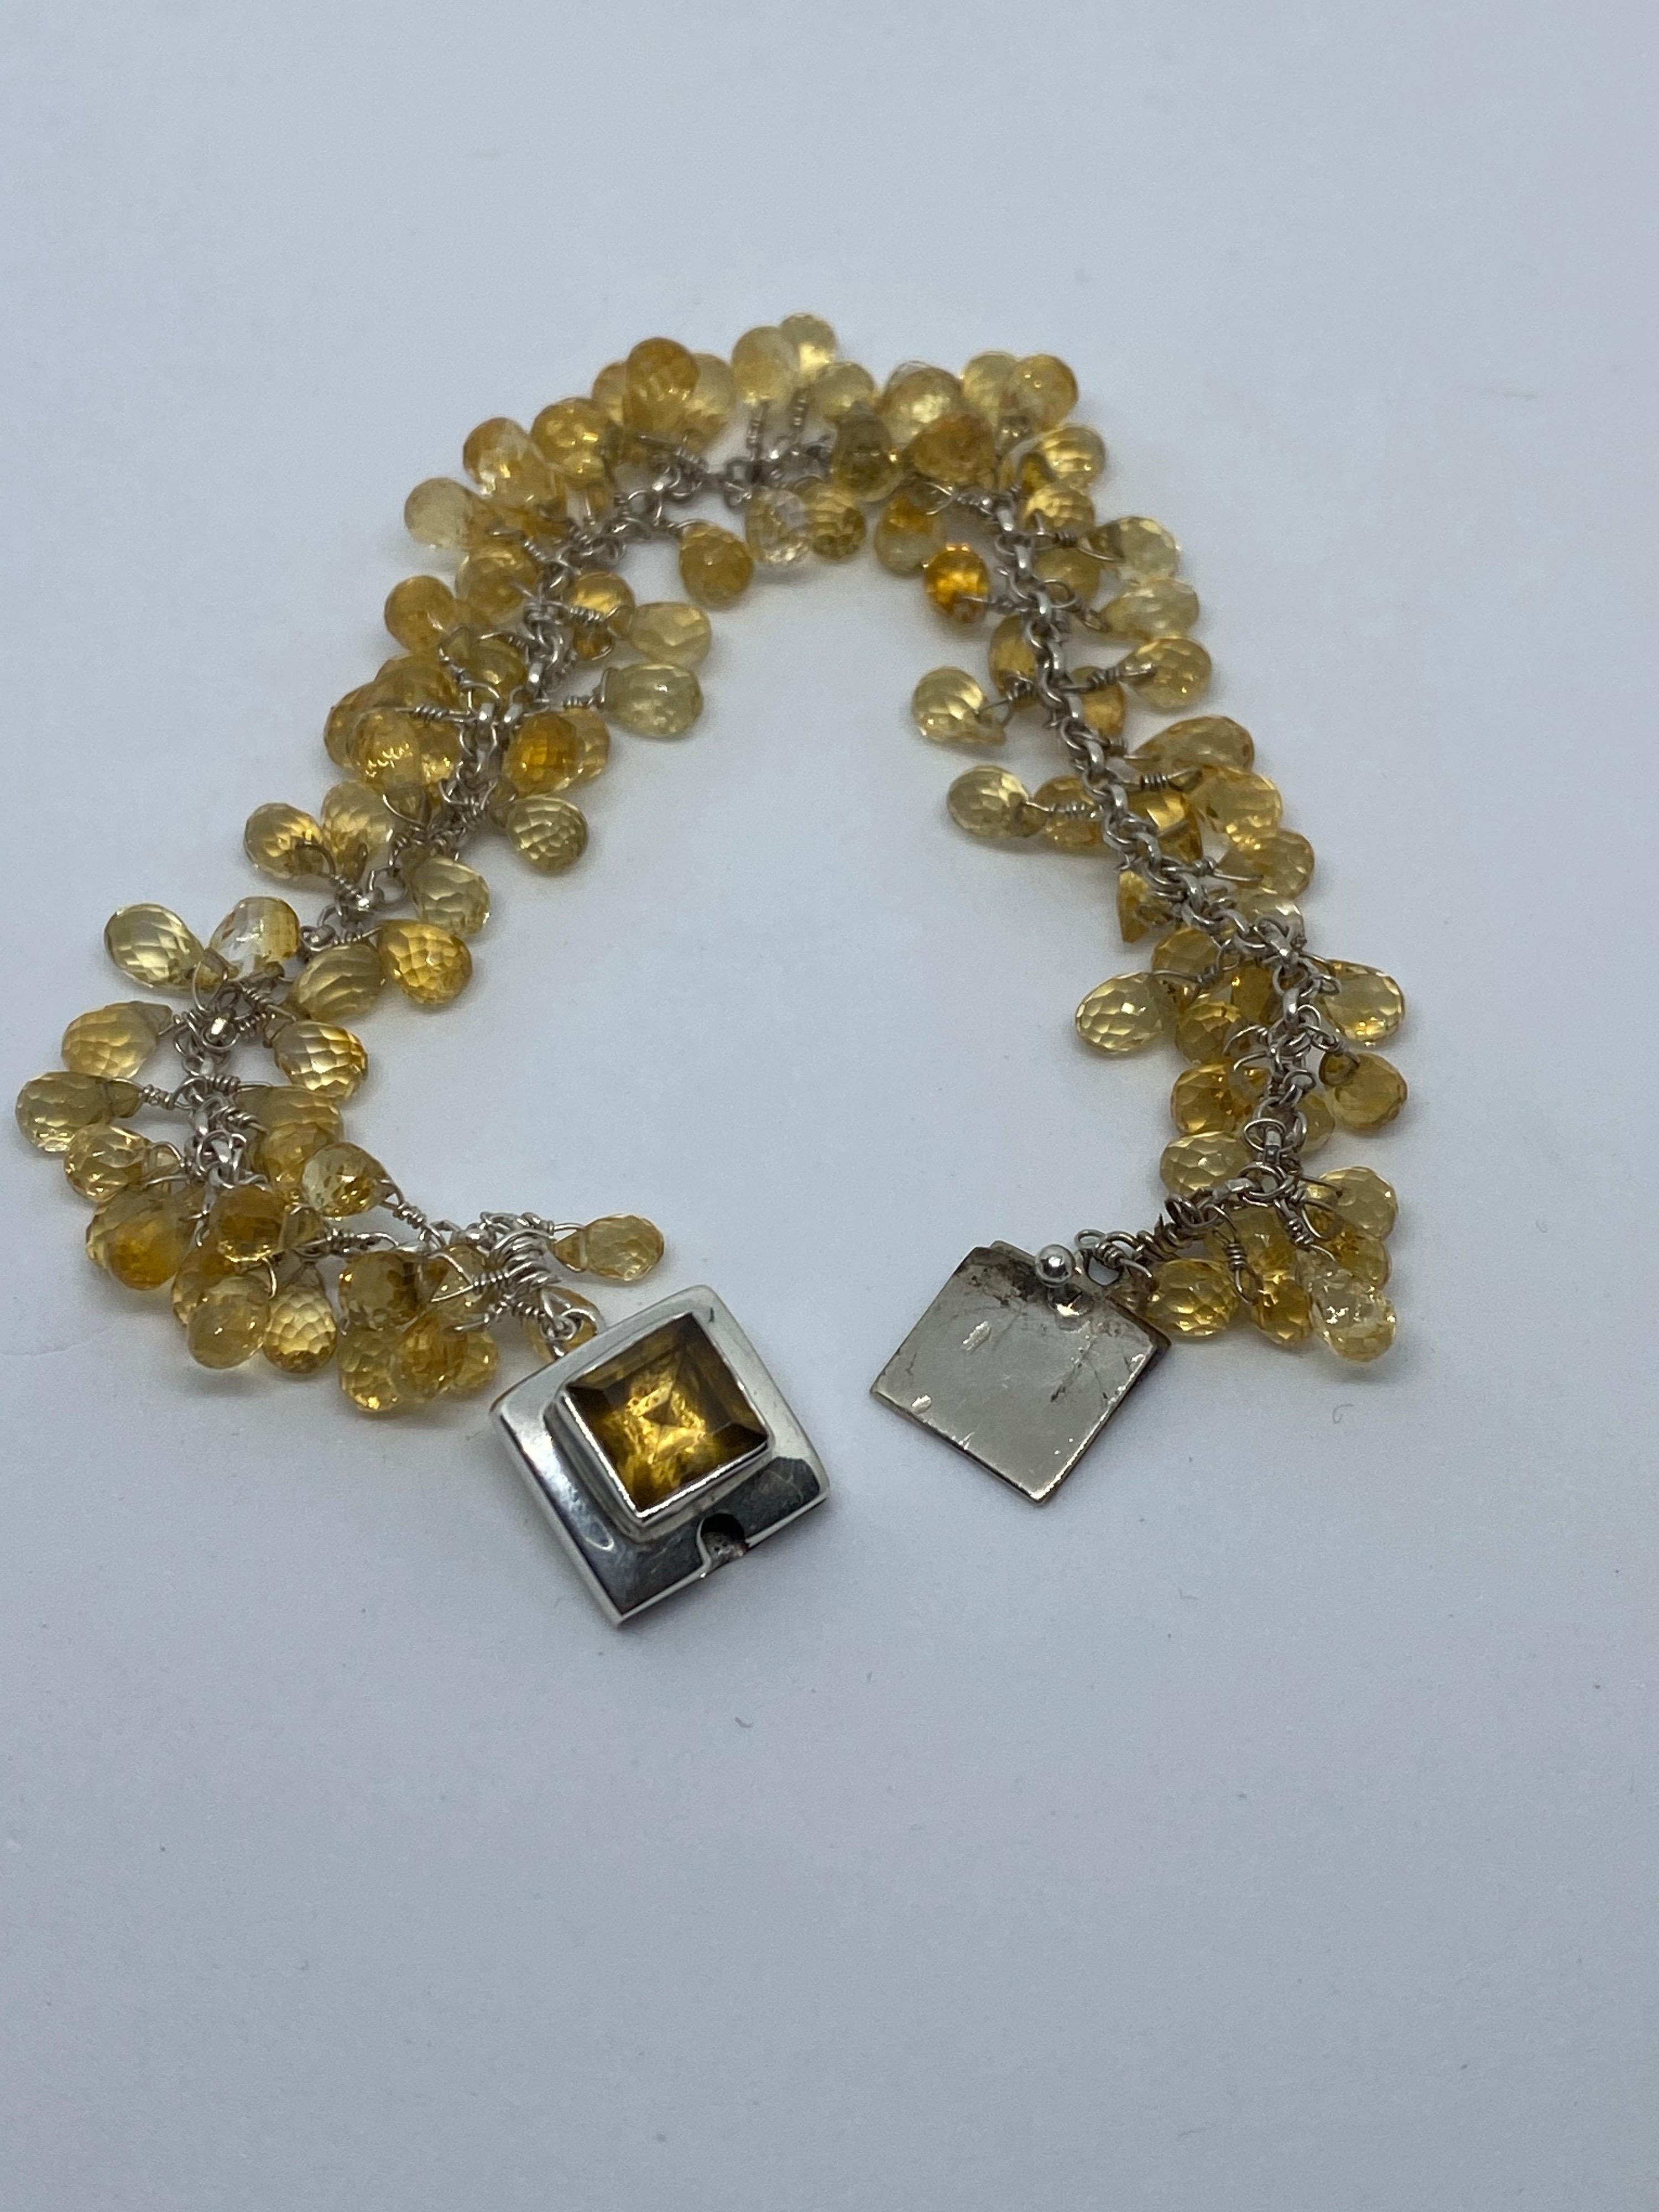 Brilliant Cut Citrine Square Cut with Briolettes in a Sterling Silver Bracelet For Sale